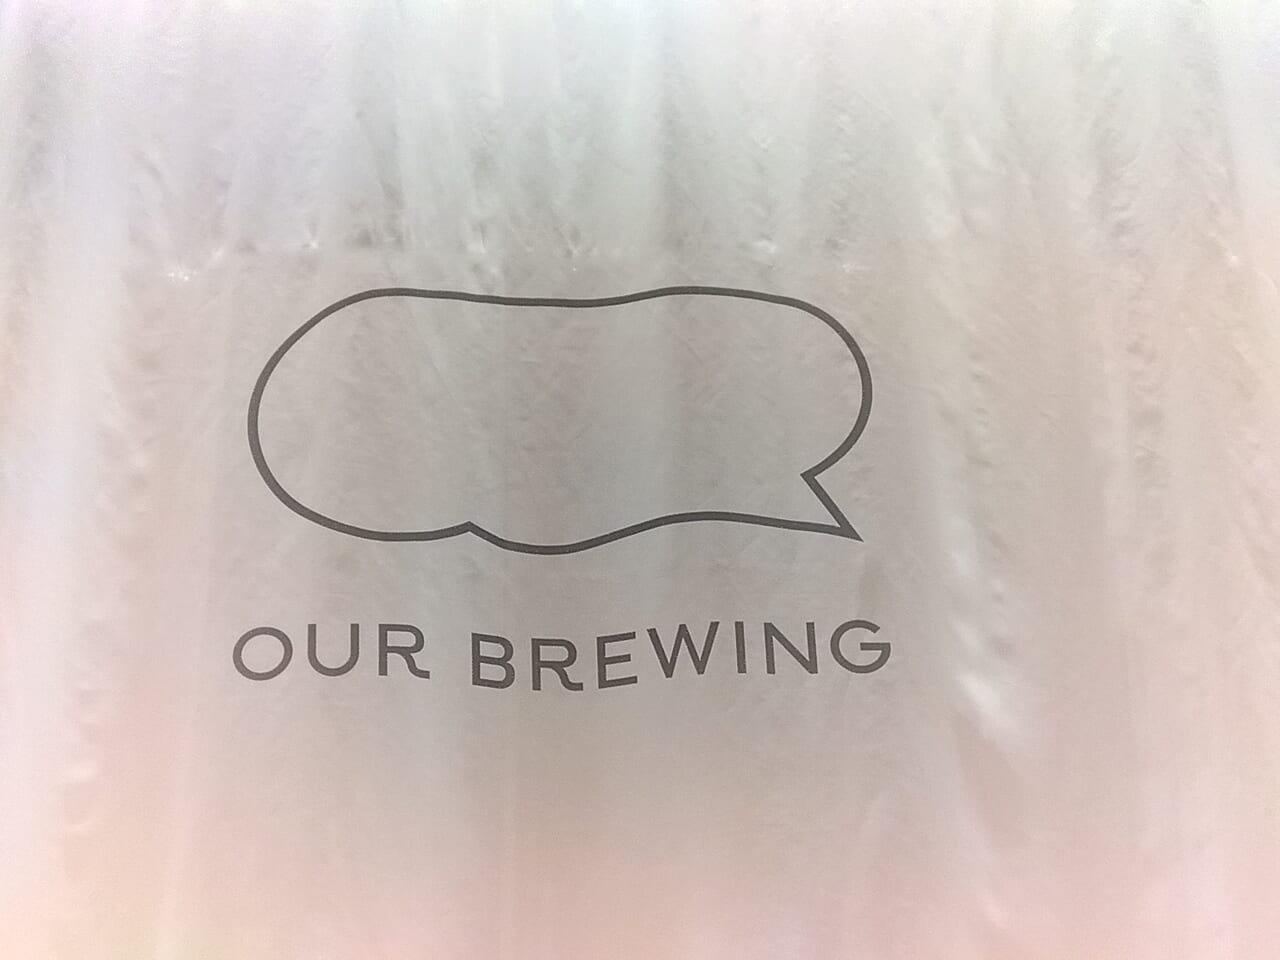 OUR BREWING